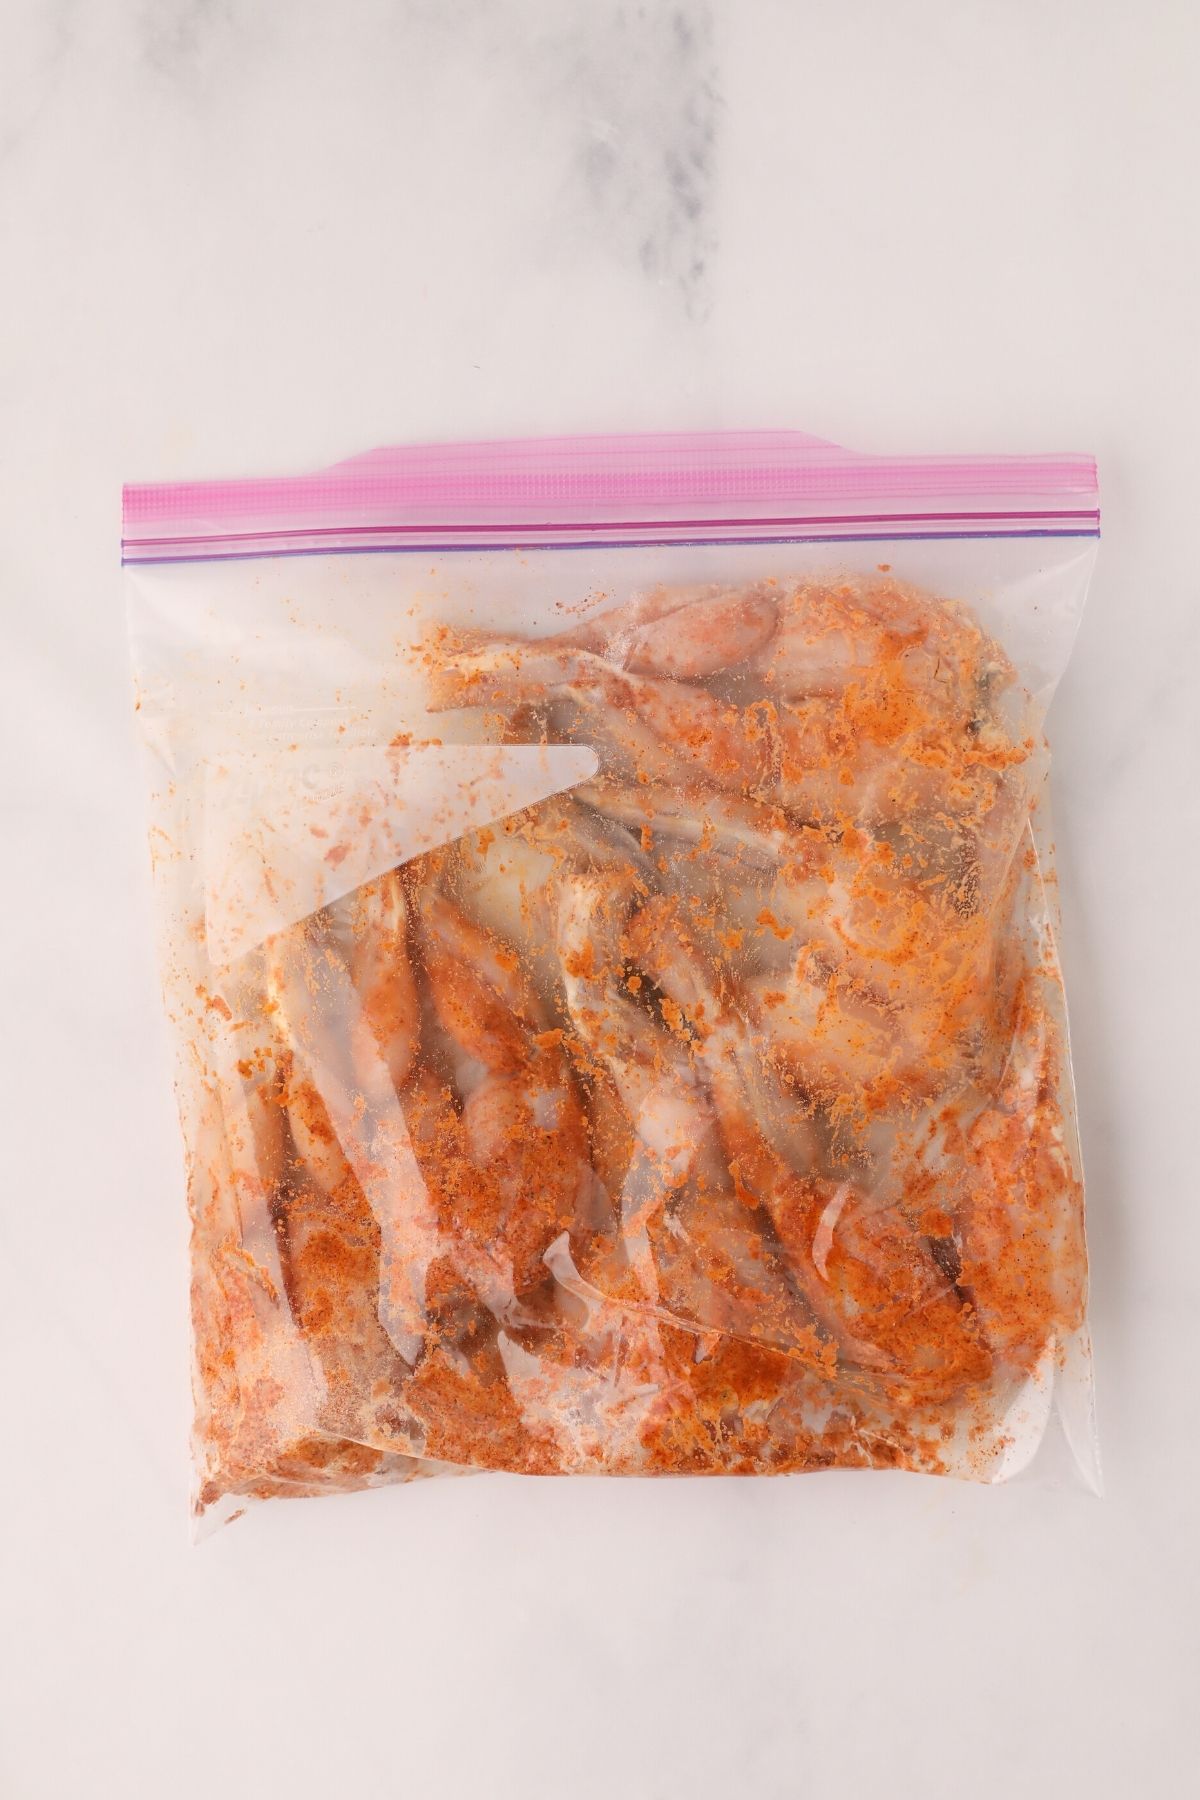 Seasonings mixed into a large bag with frog legs to season